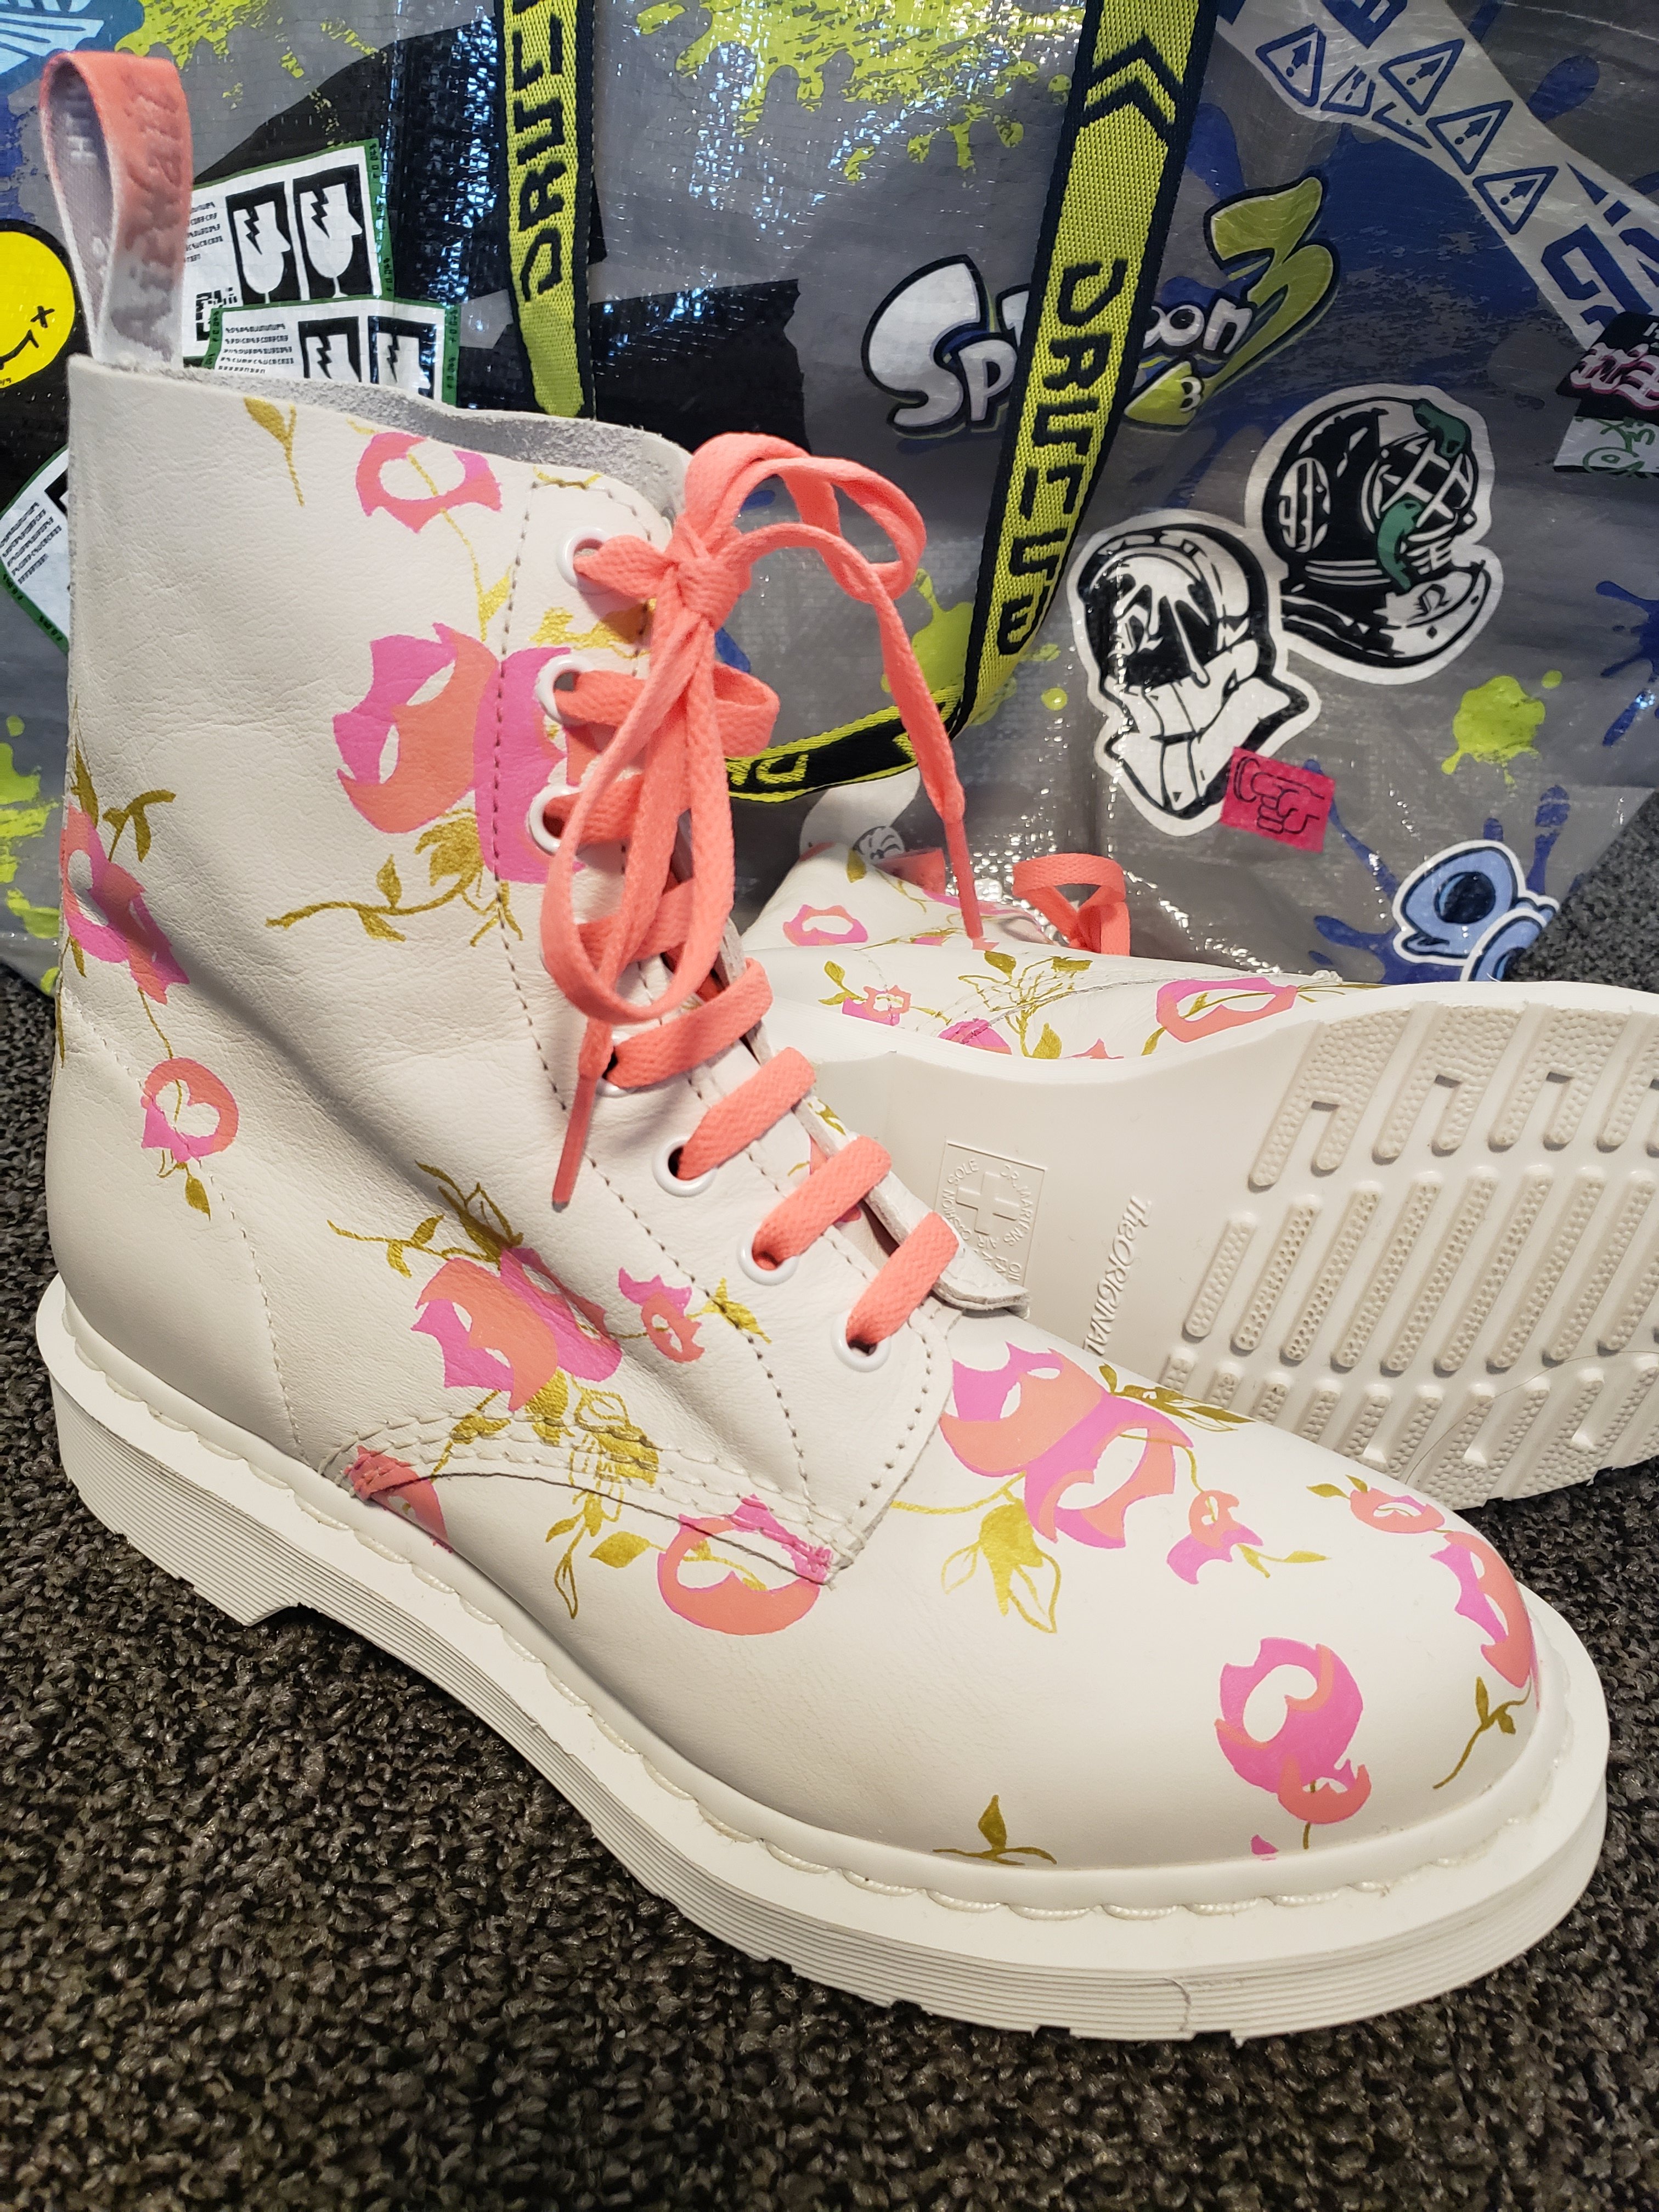 Nabi ~ 나비 🍒 on X: My custom Pearl Punk Crowns are done! Dr. Martens 1460  Pascal Monos with Posca markers 💗 #Splatoon  / X